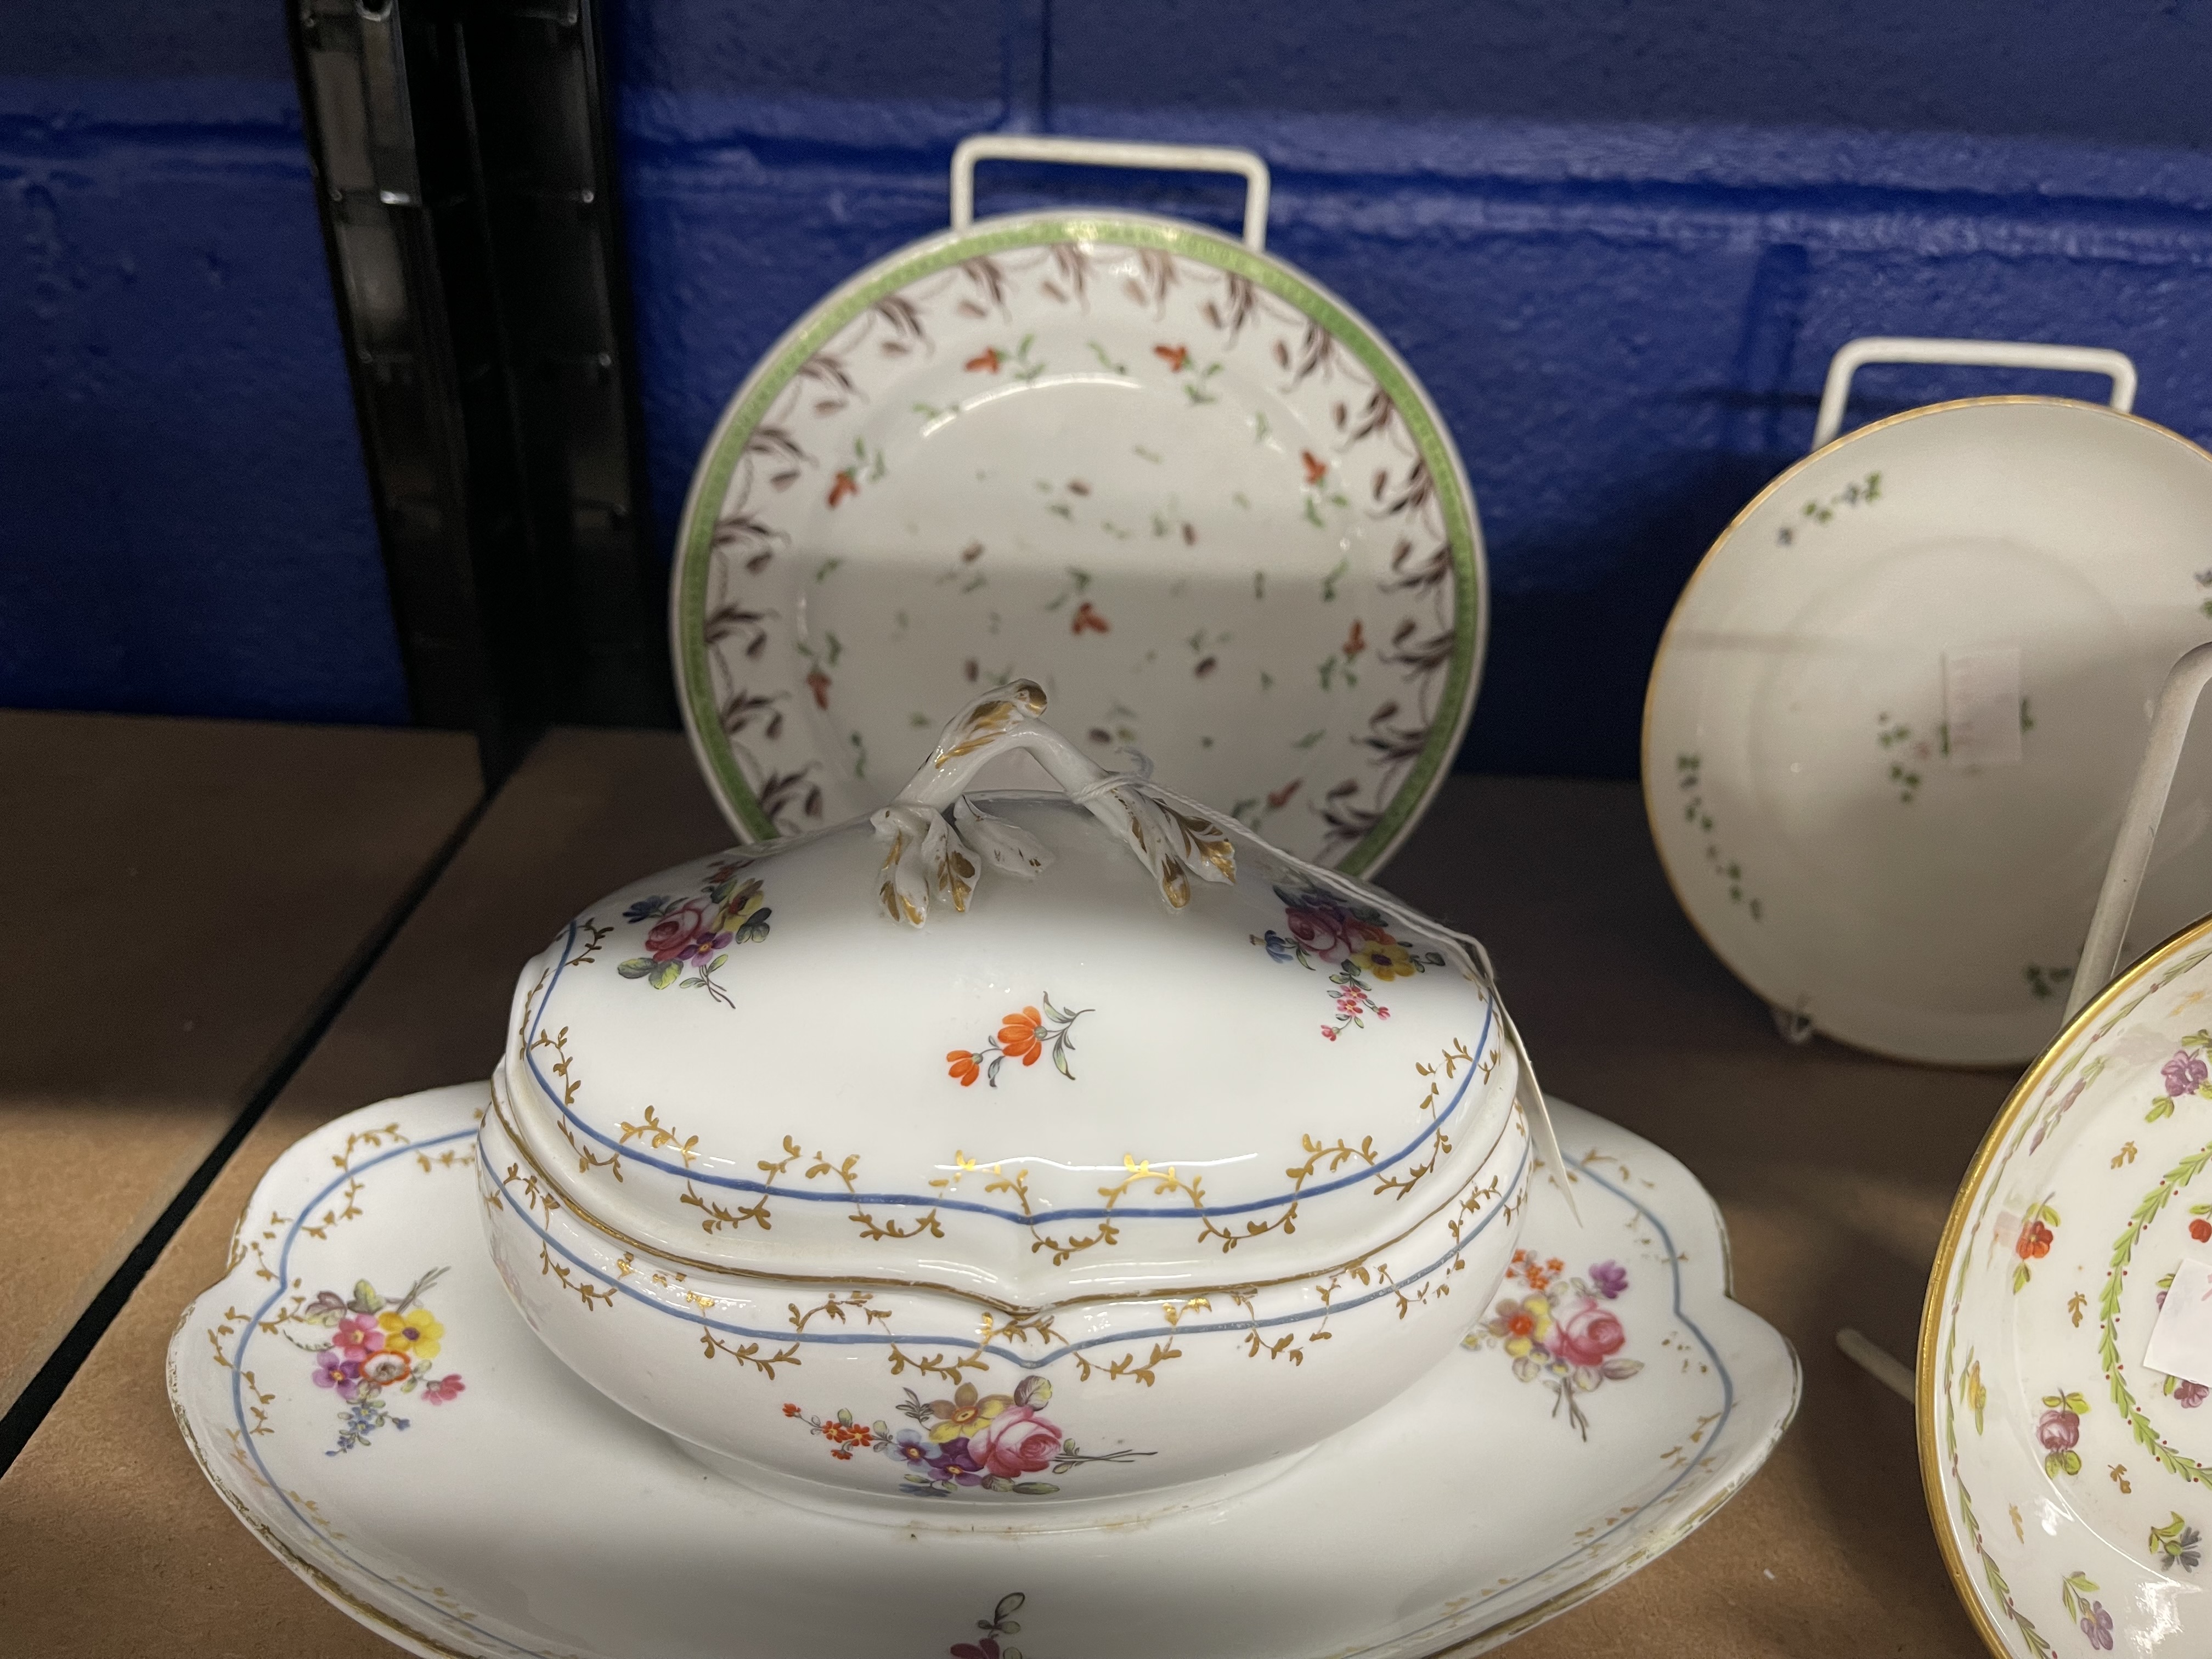 Late 18th/early 19th cent. group of Paris porcelains, including a La Courtille sauce tureen and - Image 2 of 4